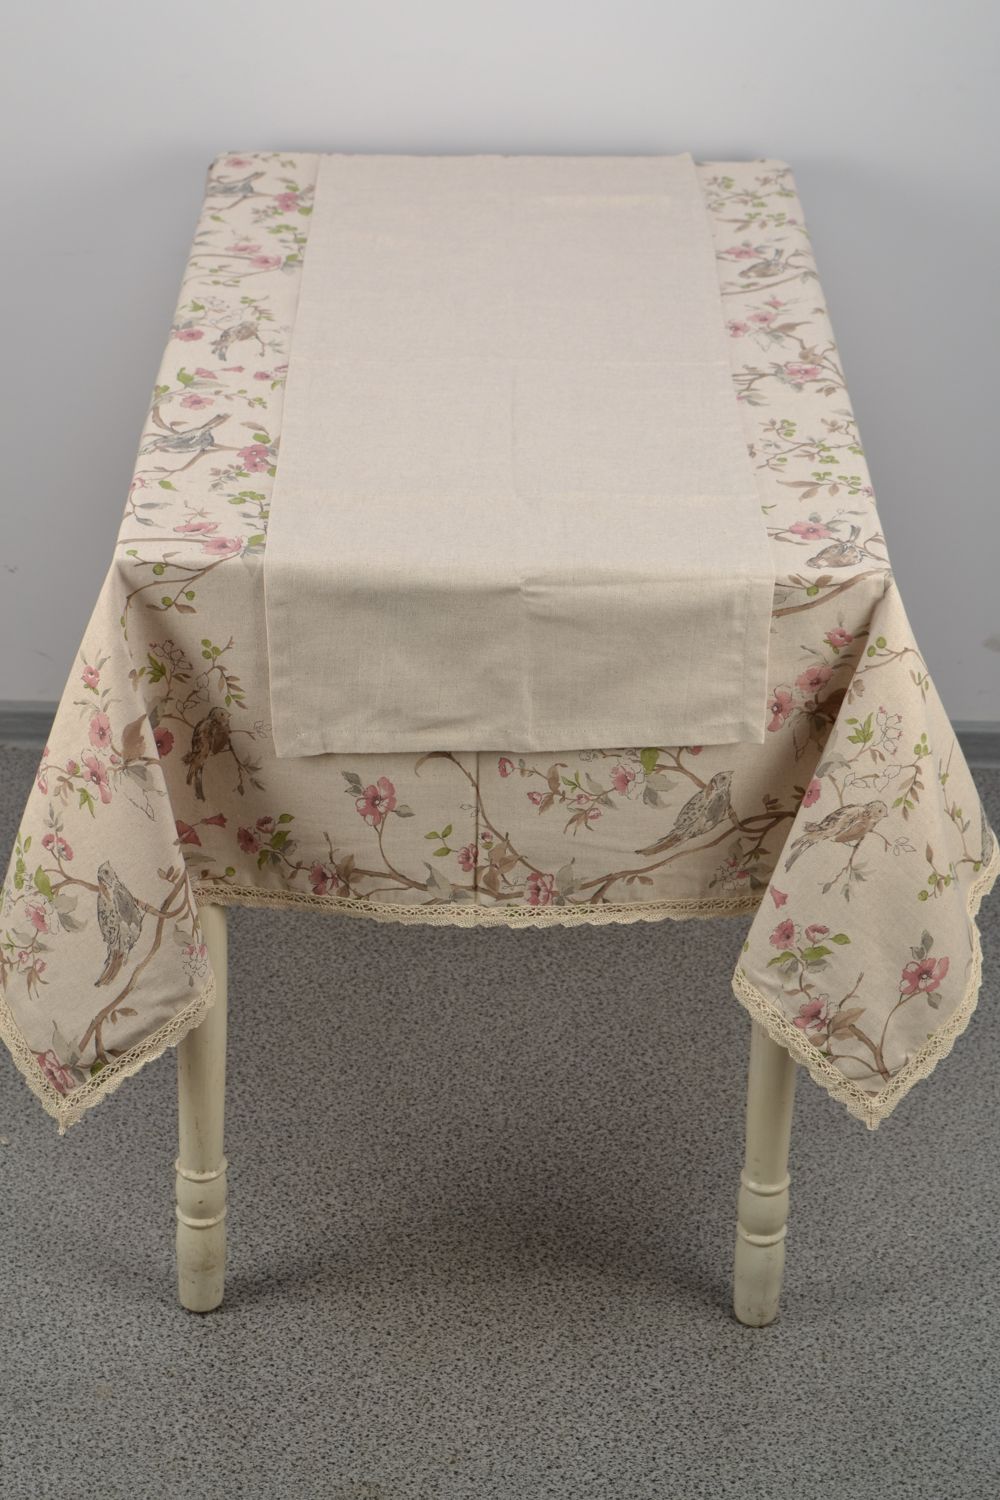 Handmade lacy cotton tablecloth photo 4